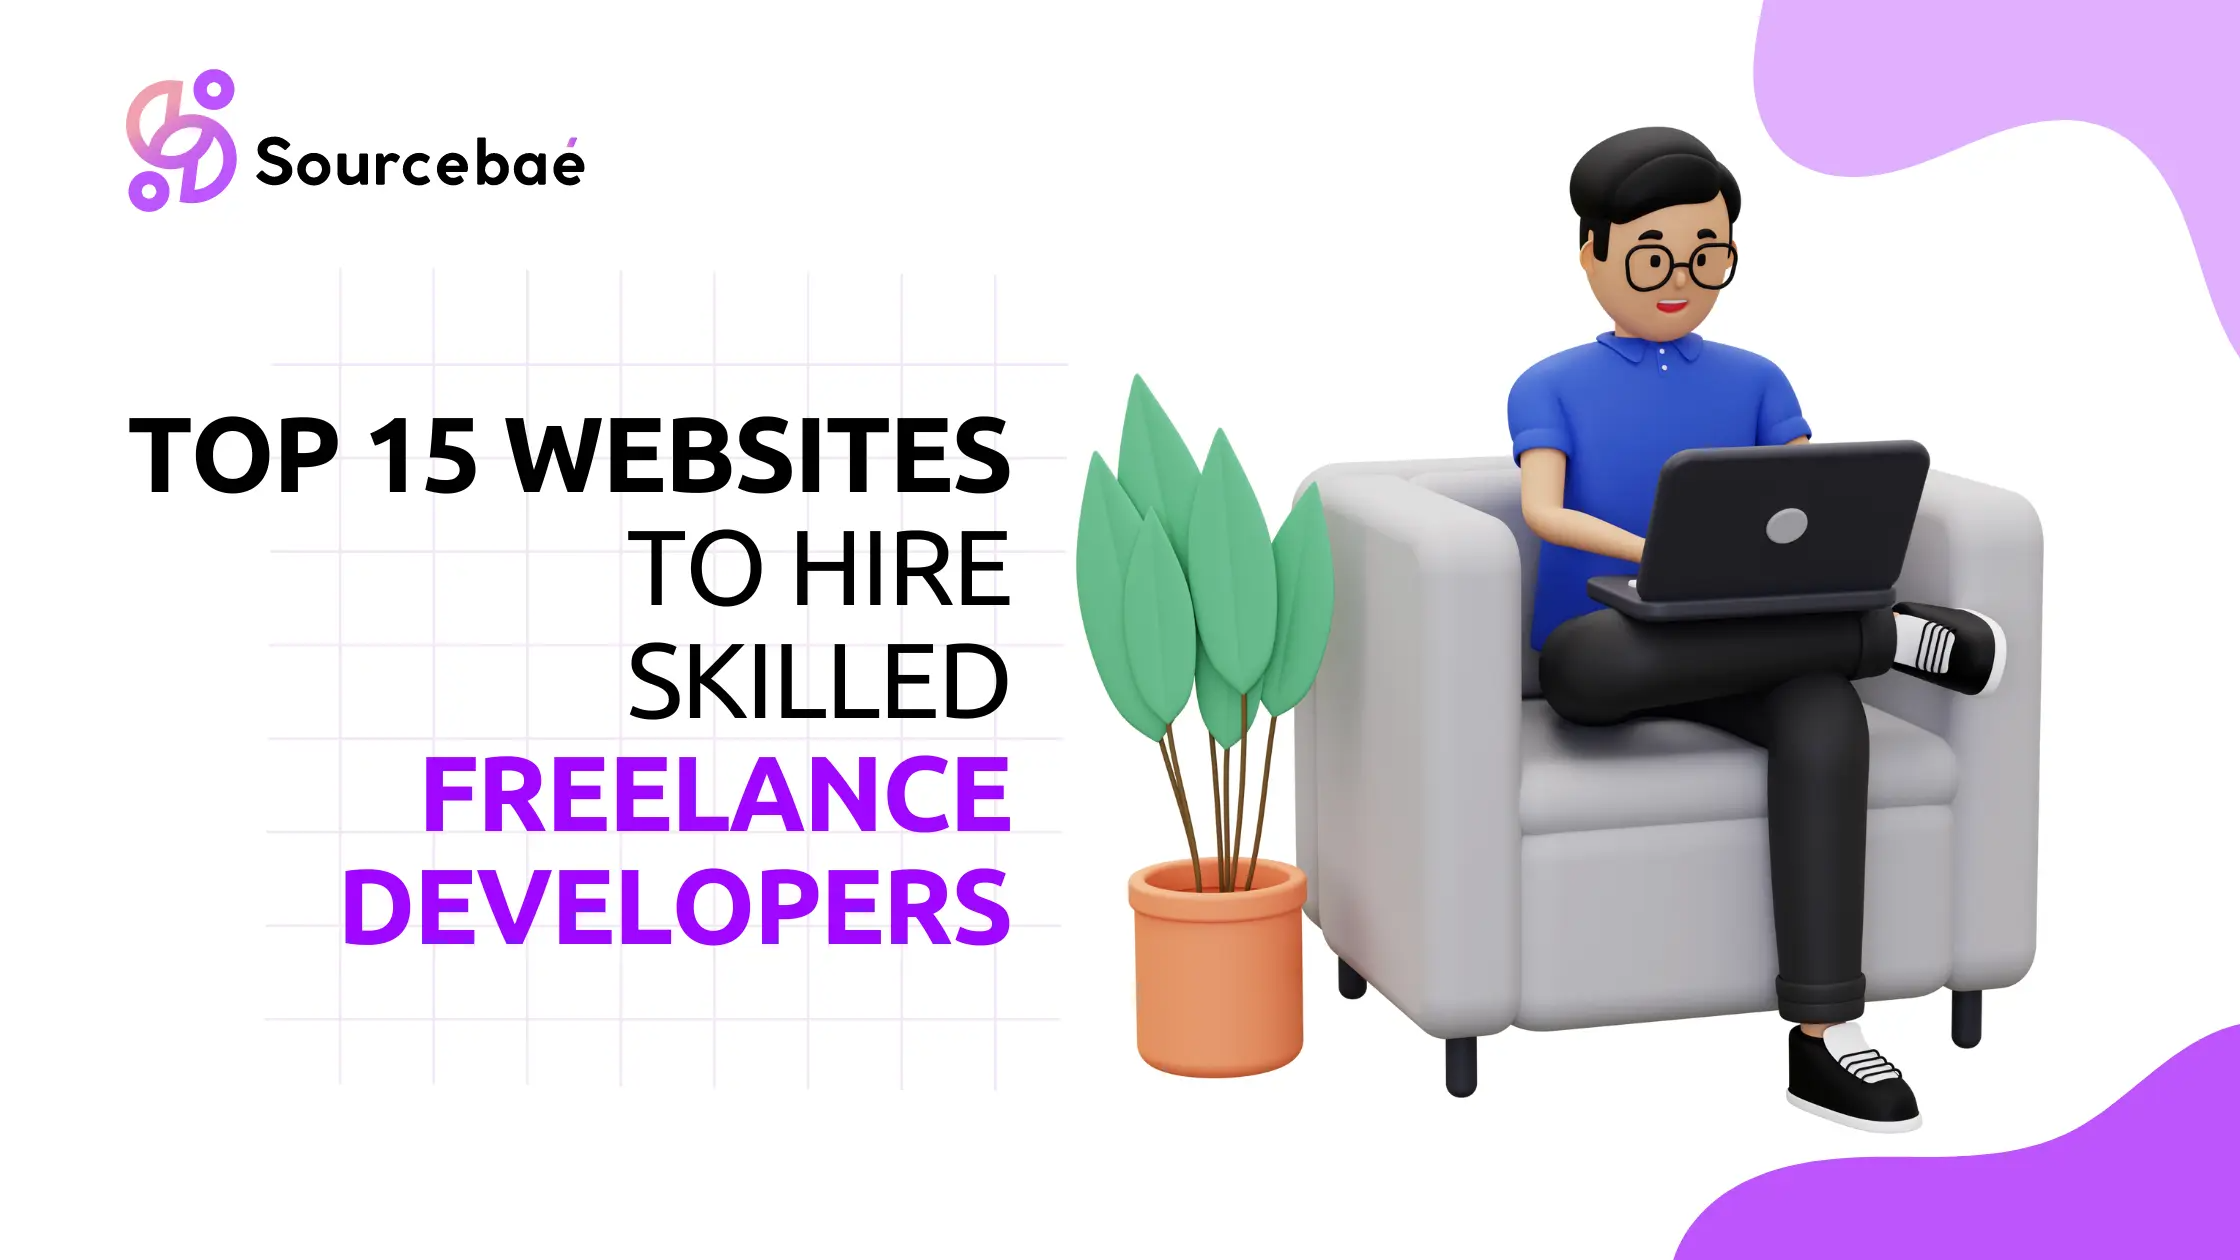 Top 15 Websites to Hire Skilled Freelance Developers